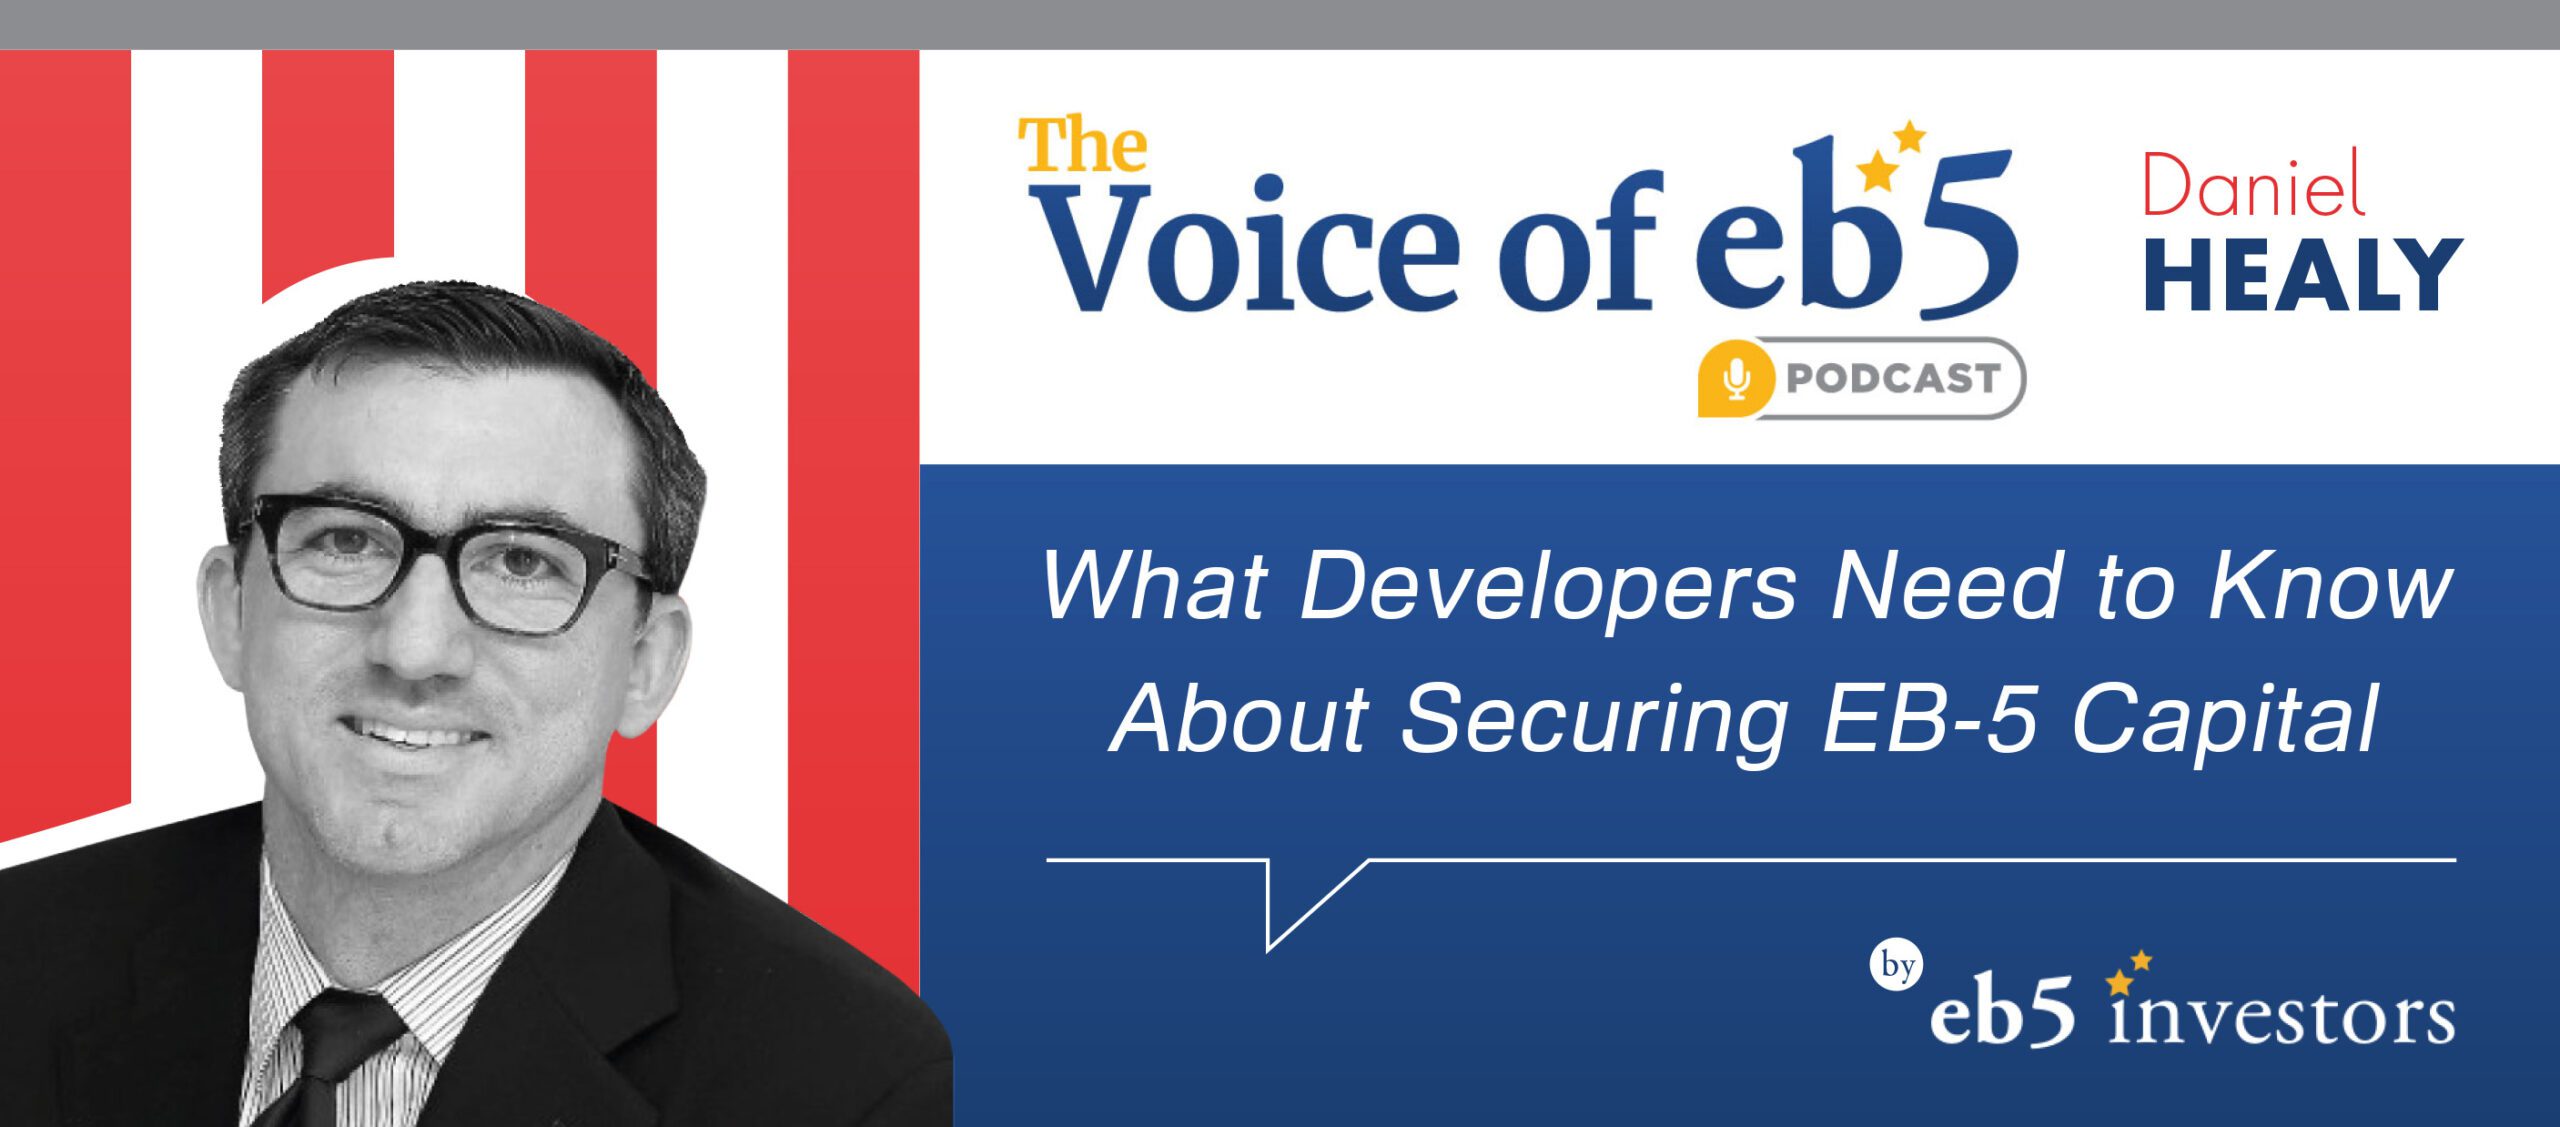 Dan Healy Discusses EB-5 With the Voice of Eb-5 Podcast